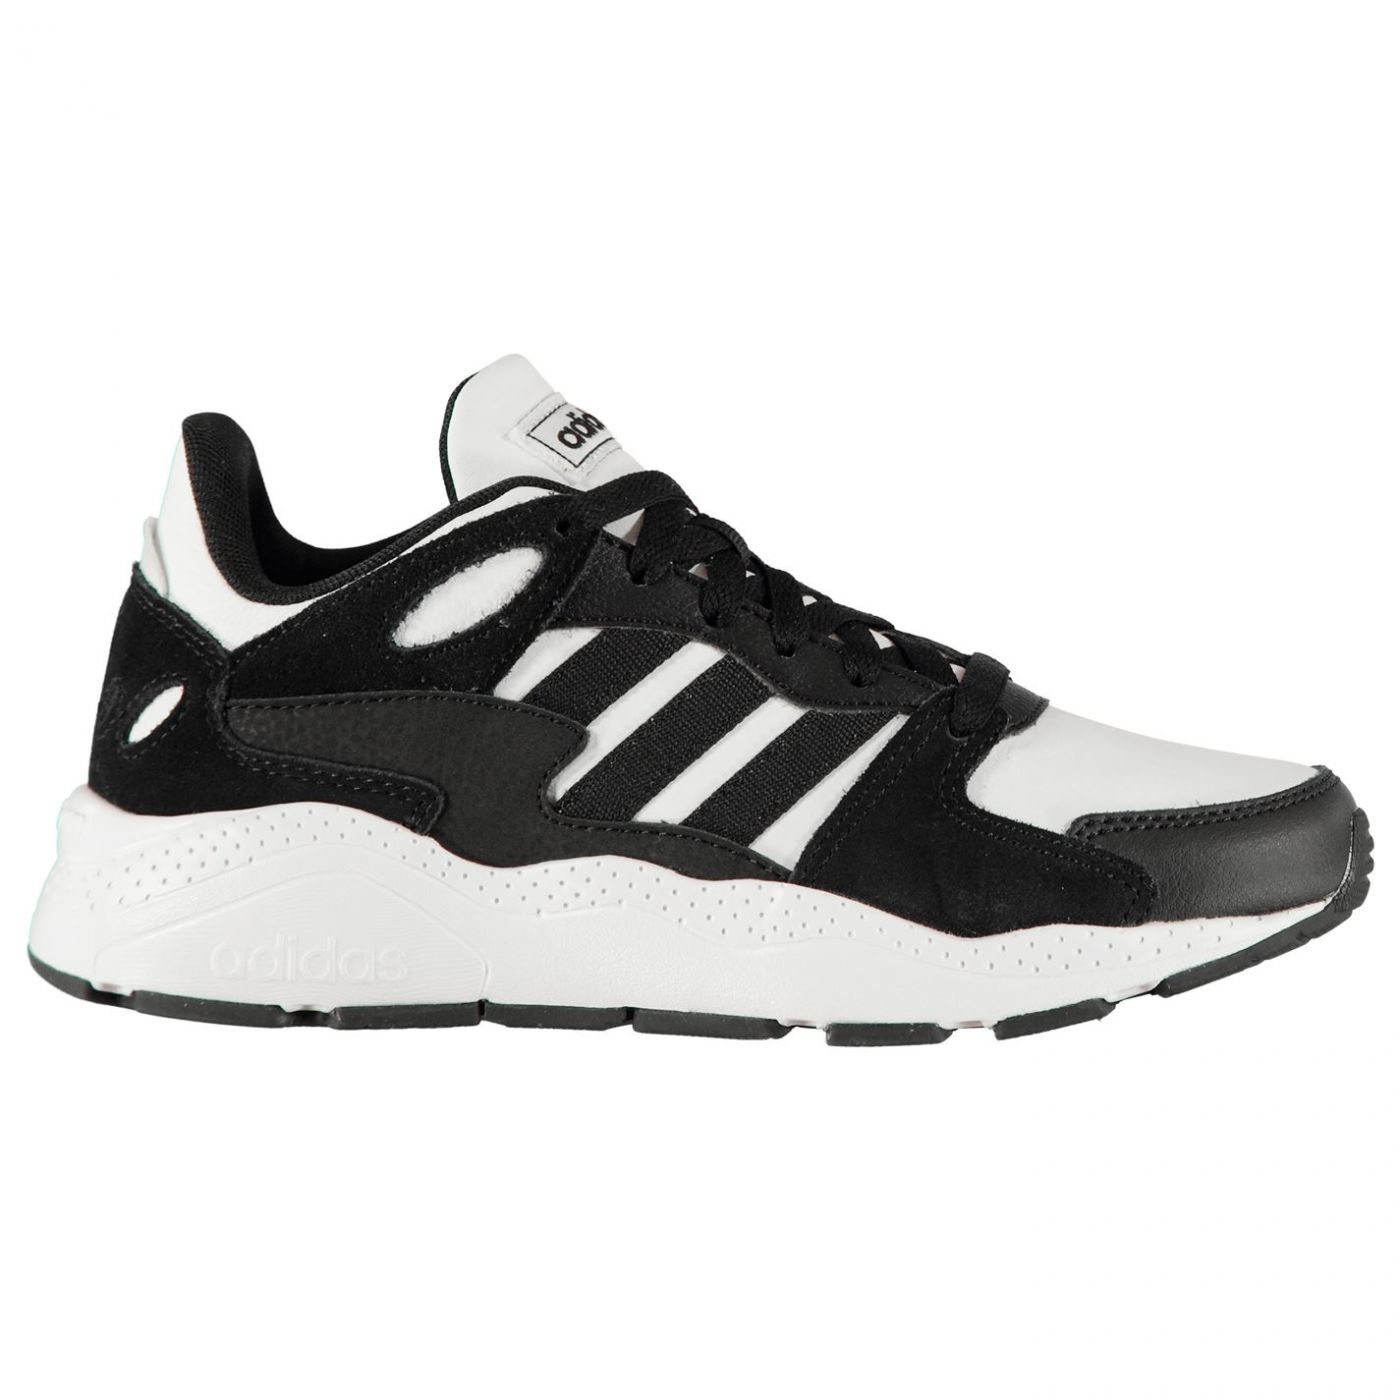 adidas crazy chaos ladies trainers